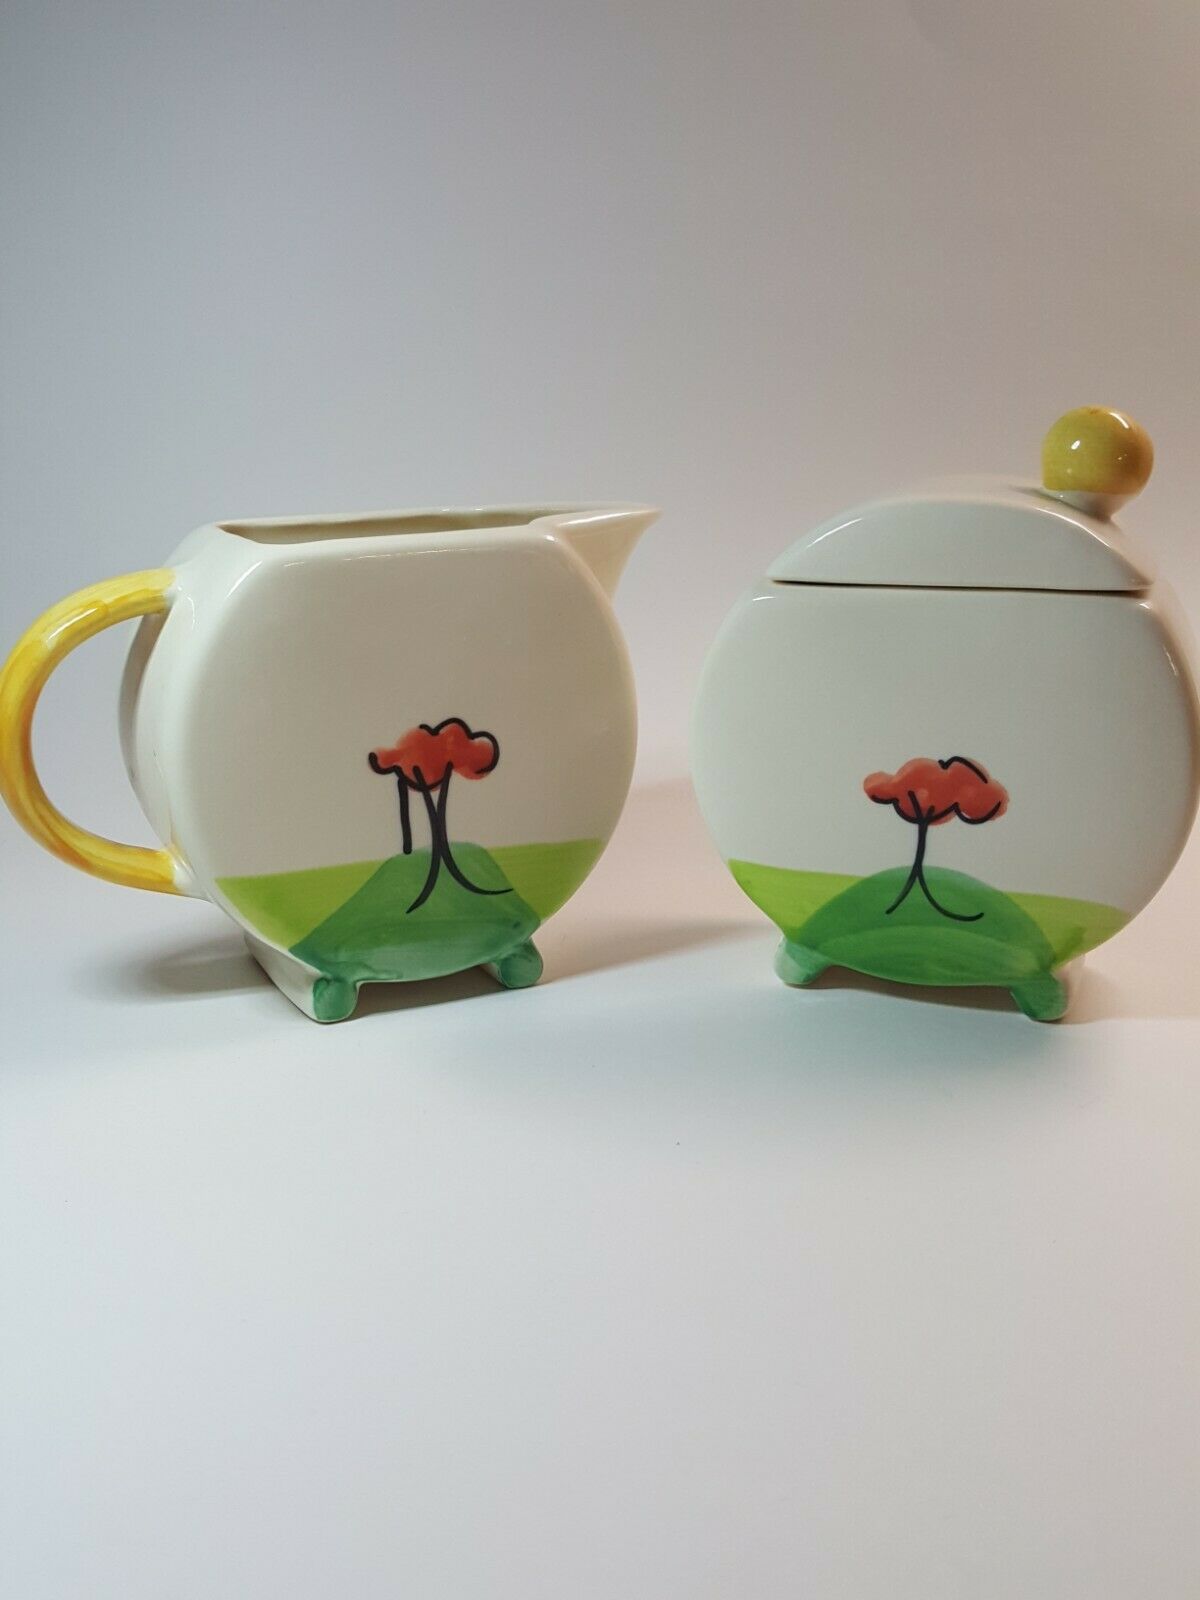 Mid century modern Creamer And Sugar Bowl Handpainted For Past Times England